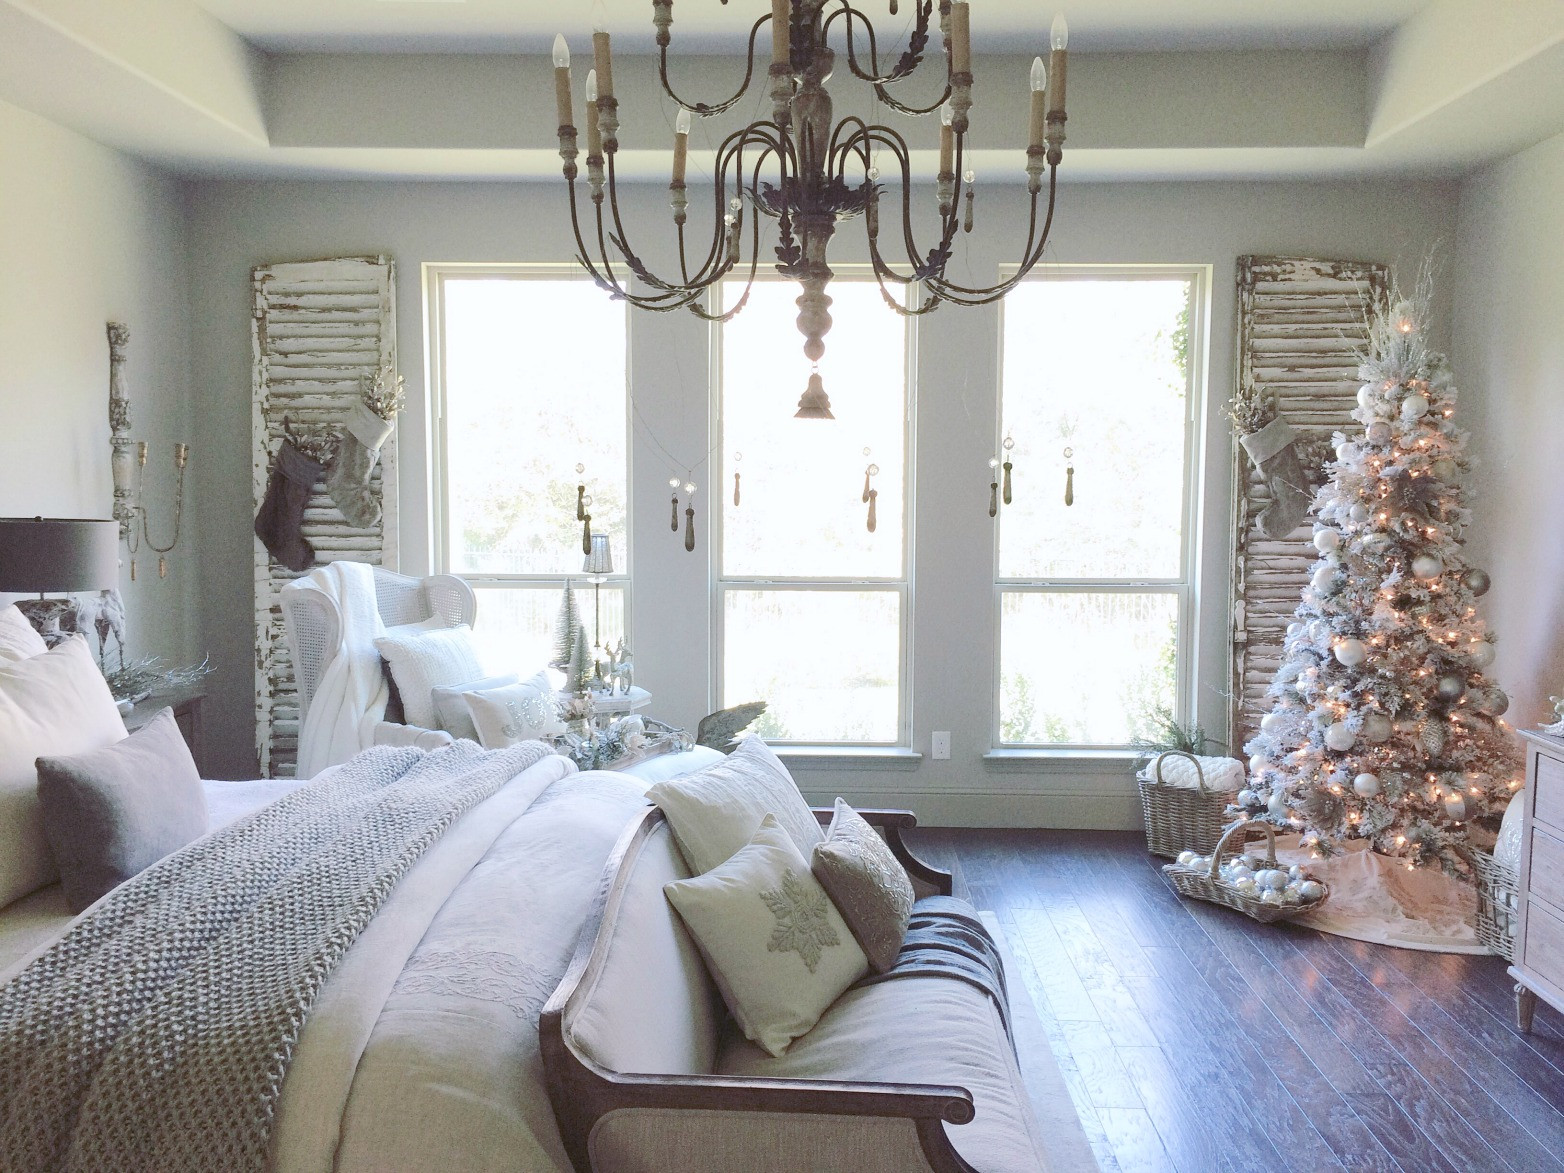 Christmas Decorations Bedroom
 Decor Gold Room Tour Just a Girl Blog